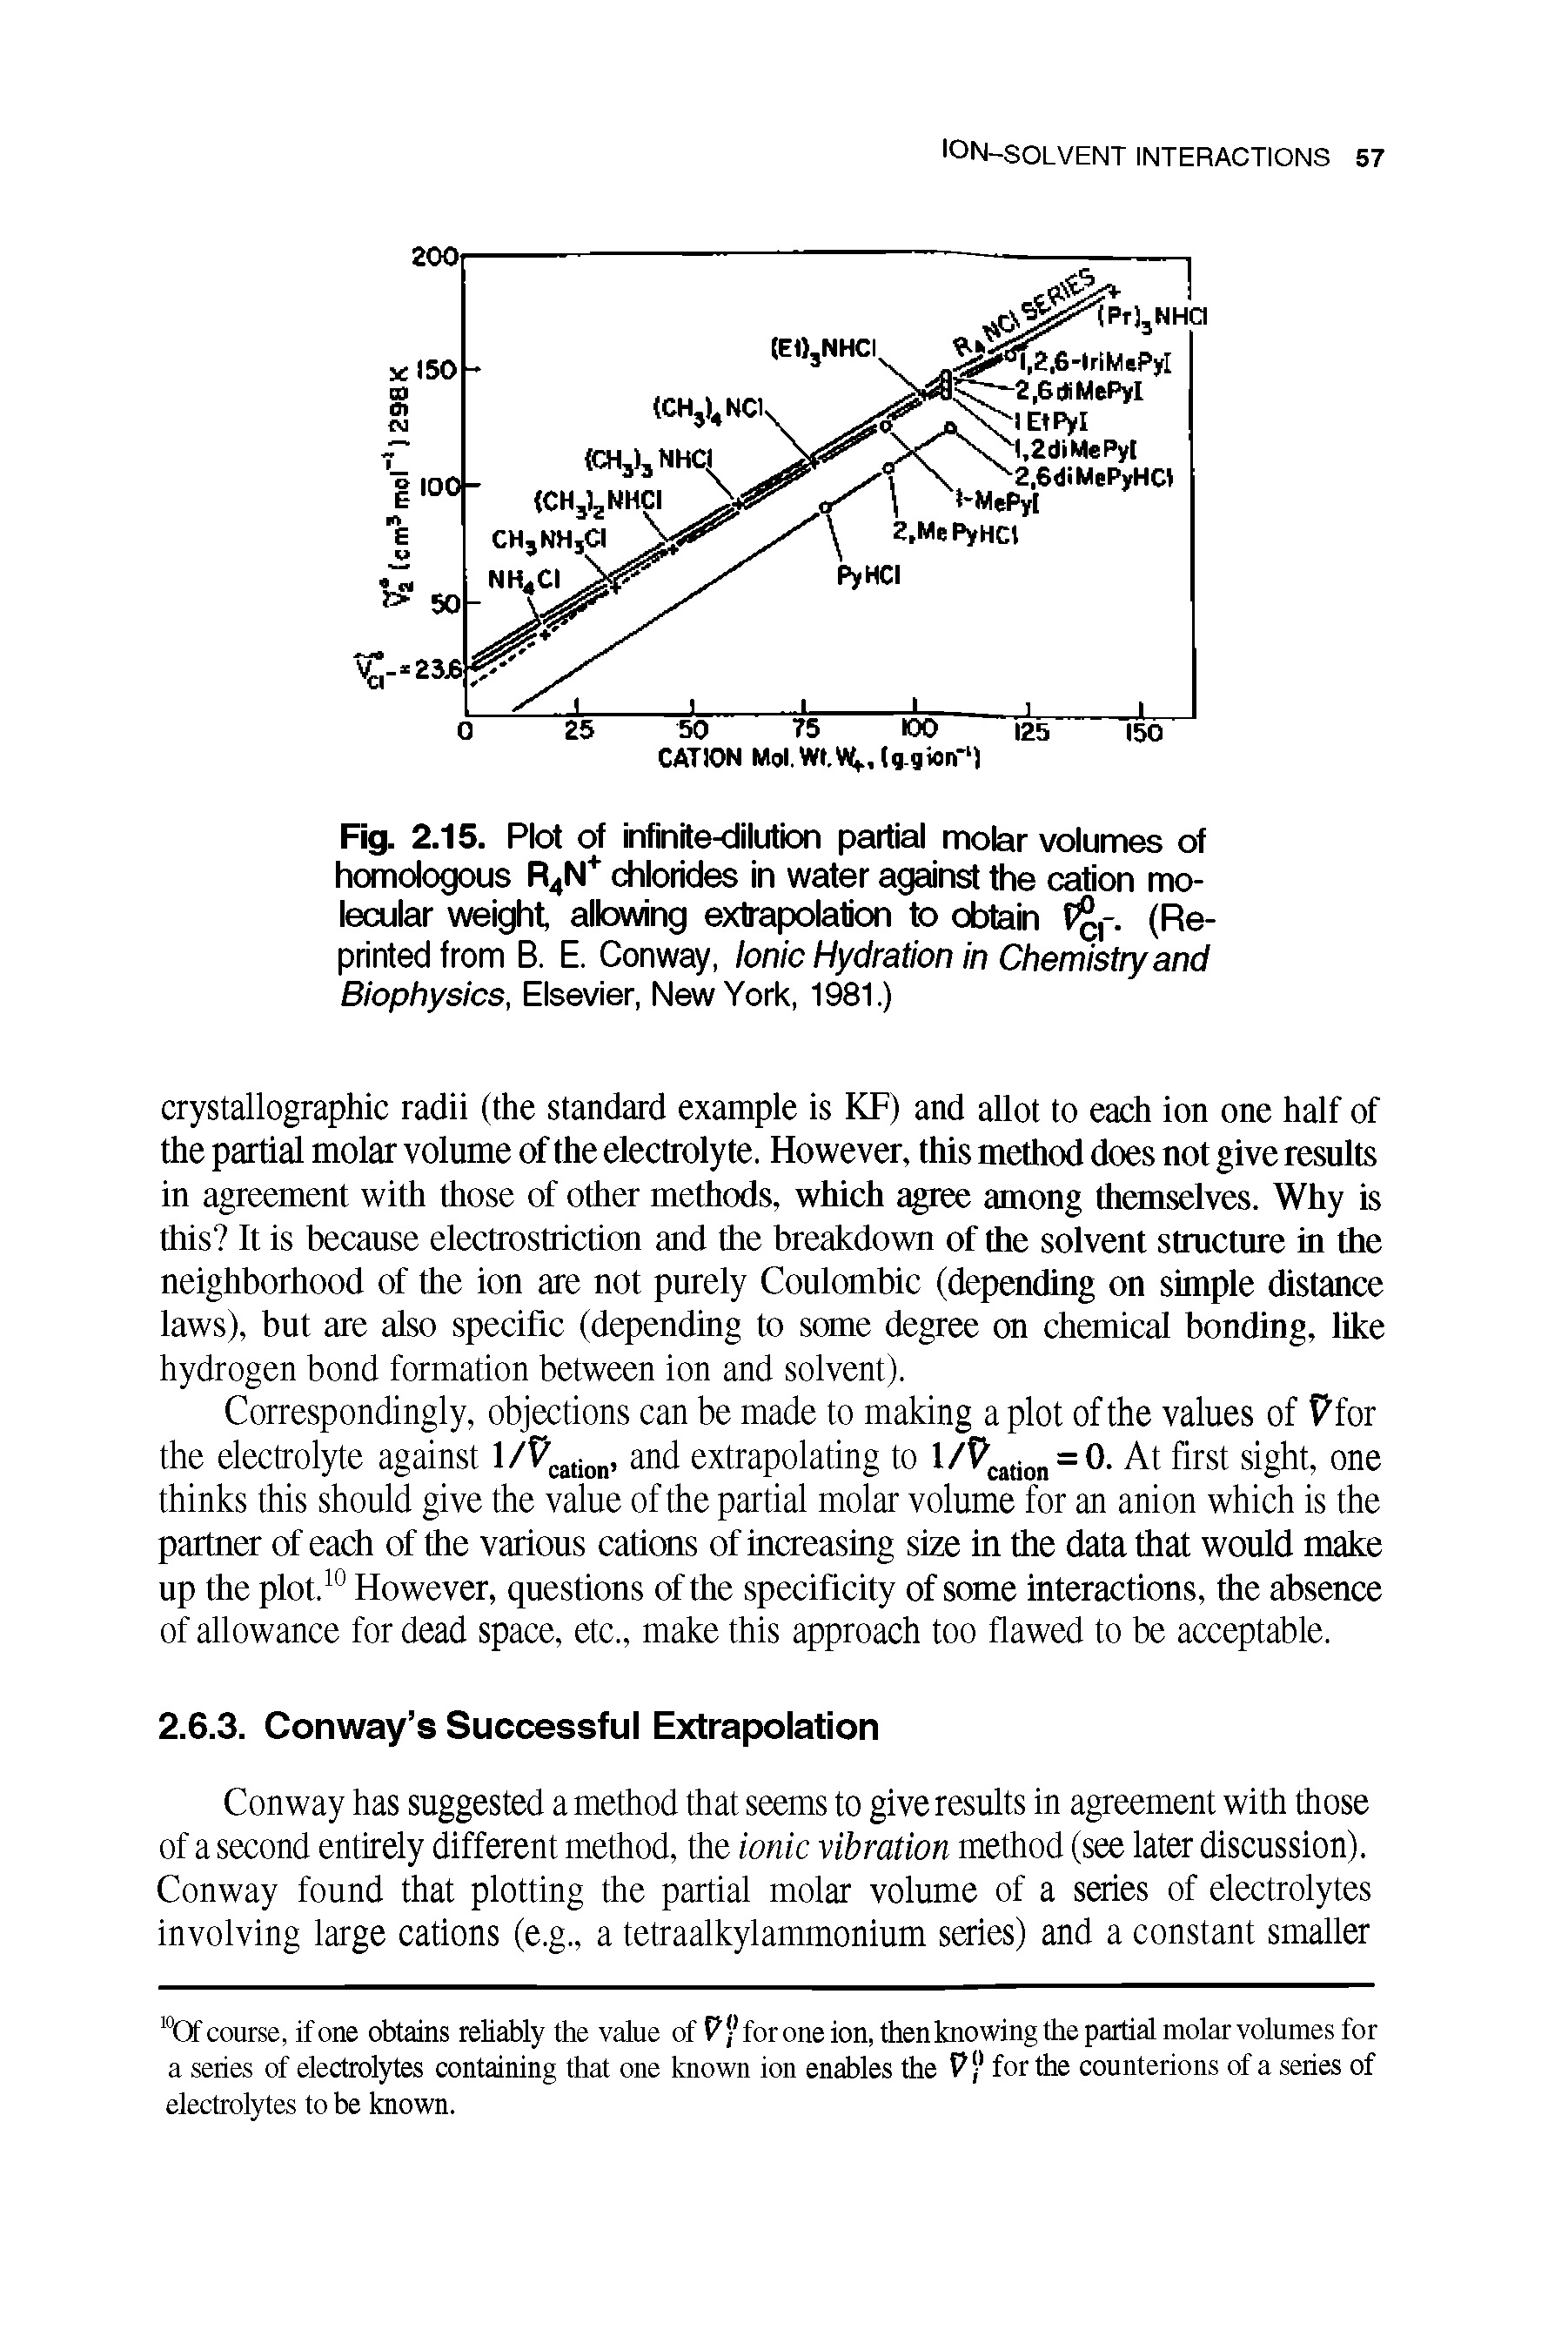 Fig. 2.15. Plot of infinite-dilution partial molar volumes of homologous R4N chlorides in water against the cation molecular weight allowing extrapolation to obtain (Reprinted from B. E. Conway, Ionic Hydration in Chemistry and Biophysics, Elsevier, New York, 1981.)...